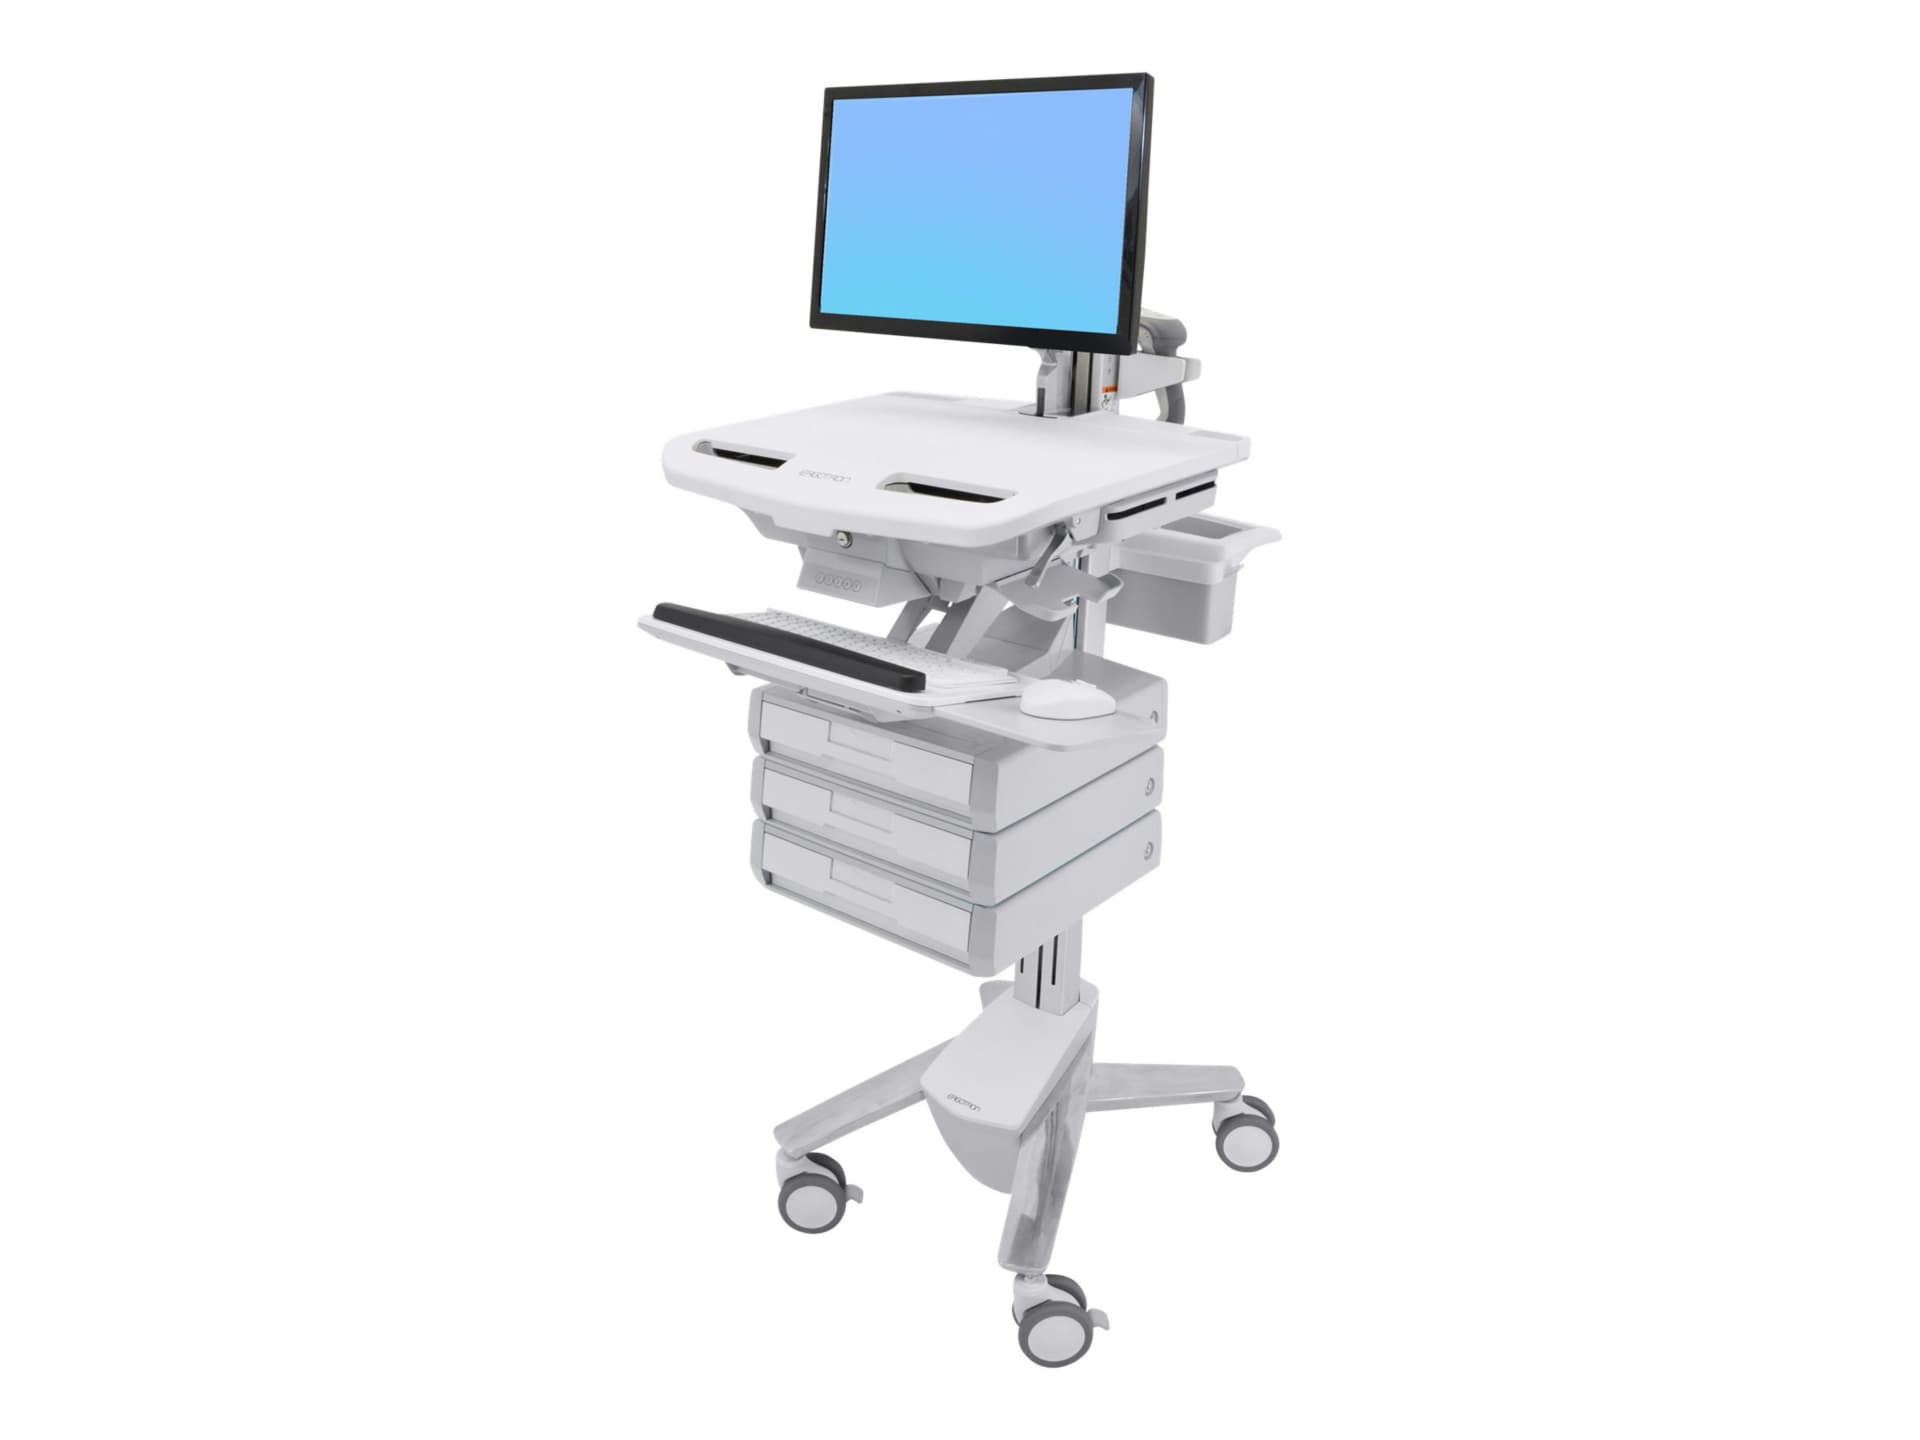 Ergotron StyleView Cart with LCD Arm, 3 Drawers cart - open architecture - for LCD display / keyboard / mouse / CPU /